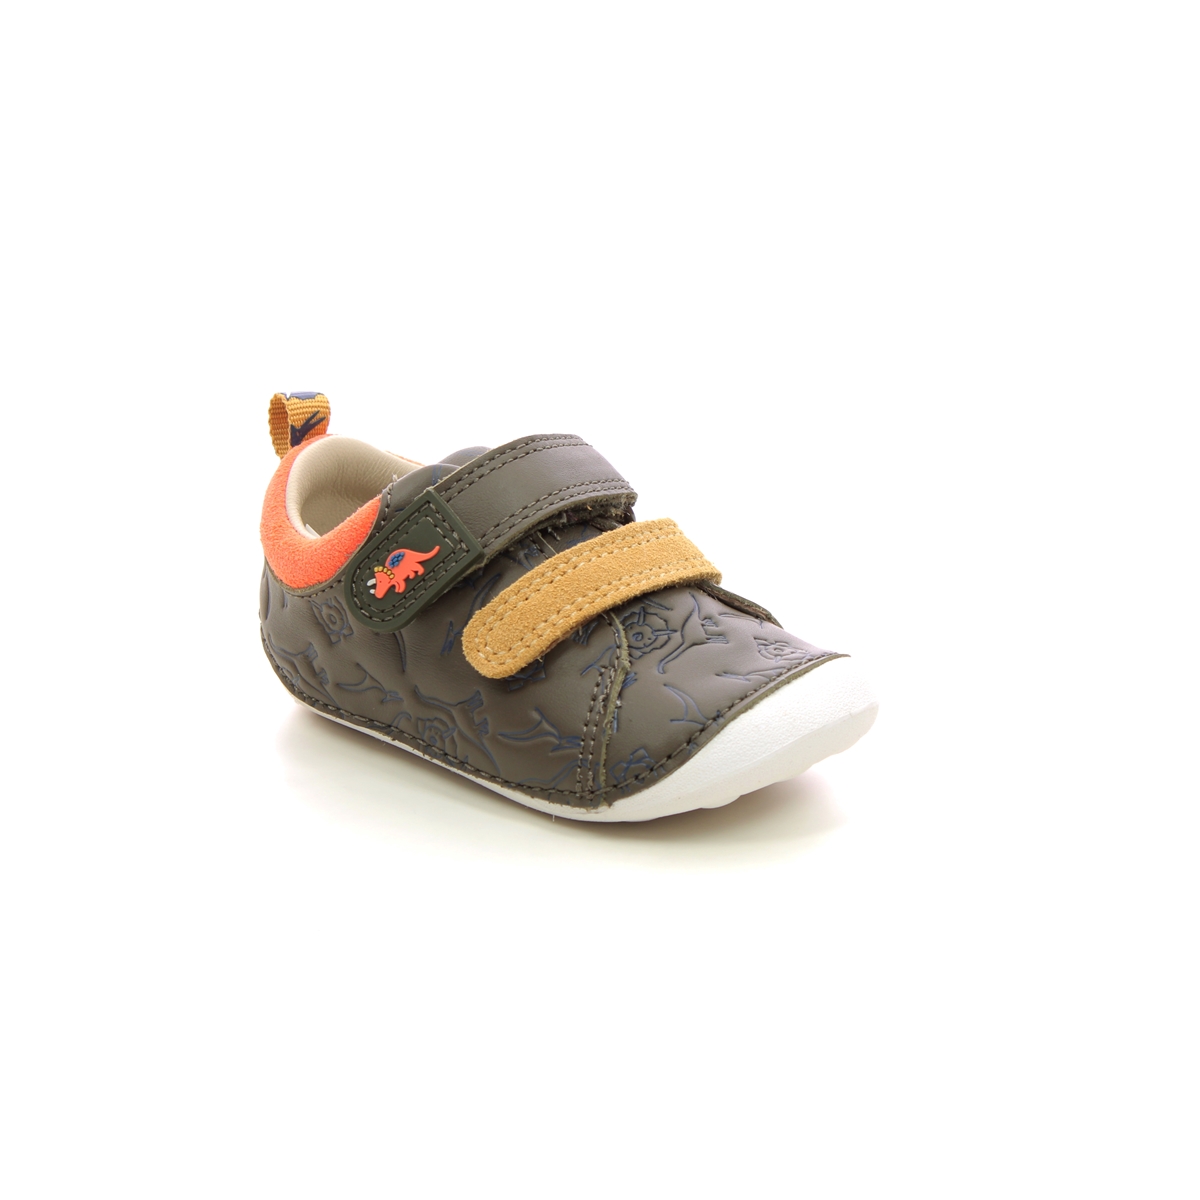 Clarks Tiny Rex T Khaki Leather Kids Boys First Shoes 7229-66F in a Plain Leather in Size 3